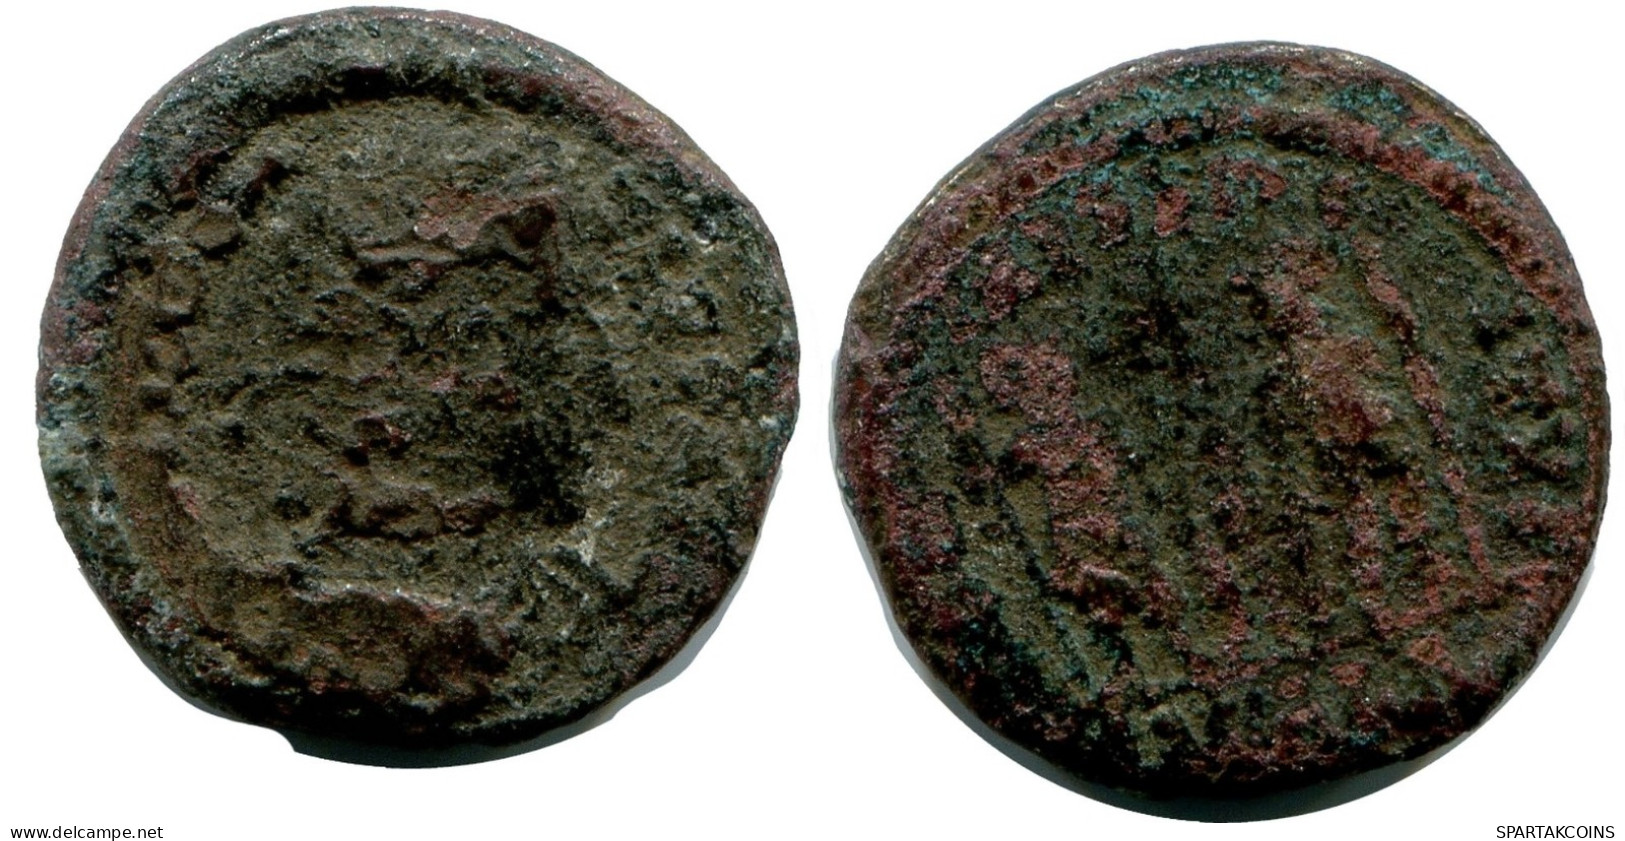 ROMAN Pièce MINTED IN ALEKSANDRIA FROM THE ROYAL ONTARIO MUSEUM #ANC10184.14.F.A - Der Christlischen Kaiser (307 / 363)